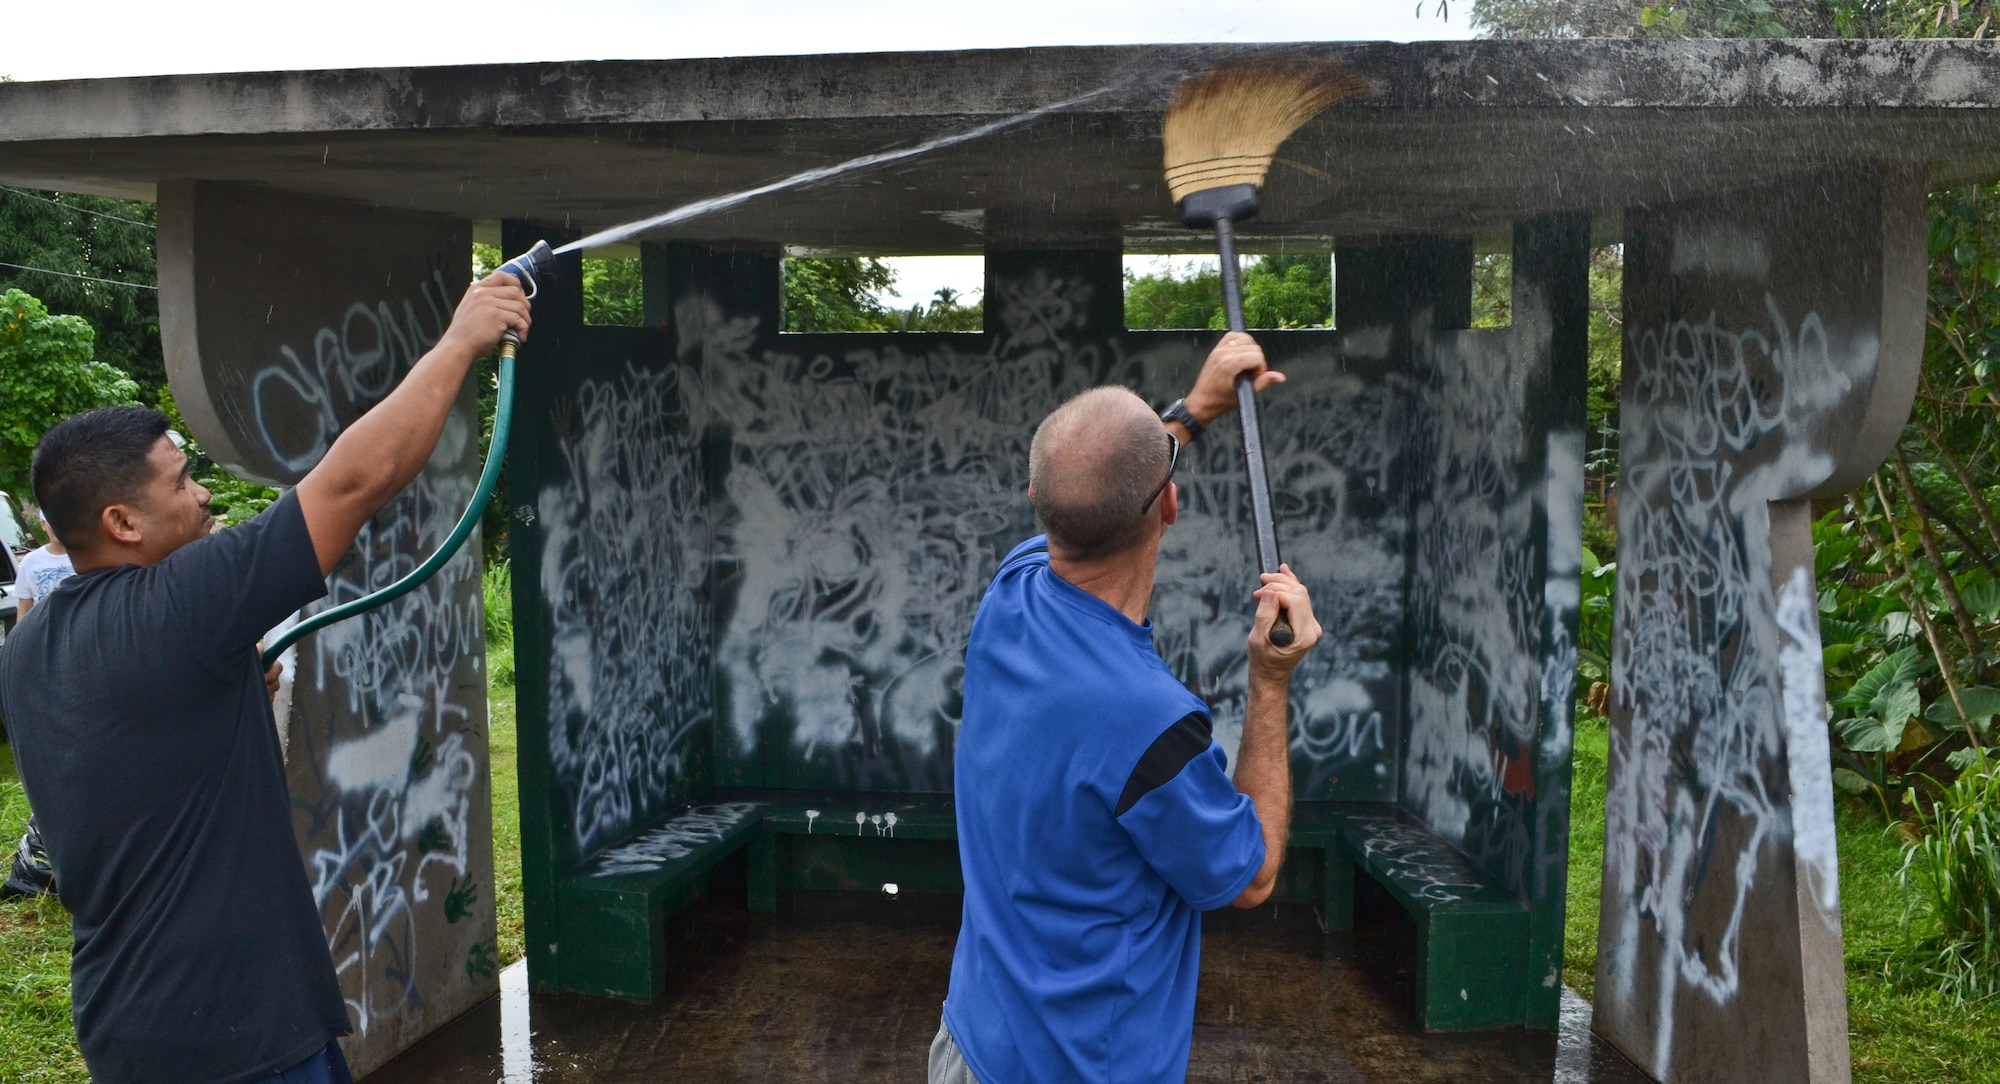 Airmen from the 36th Maintenance Squadron wash off dirt and old paint prior to repainting a bus stop for an Island Beautification project in Mangilao, Guam Oct 15.  Throughout the year, squadrons from Andersen AFB volunteer their time to help clean, repair and build areas in Guam communities in support of the Islandwide Beautification Task Force. (U.S. Air Force photo by Staff Sgt. Alexandre Montes/RELEASED) 